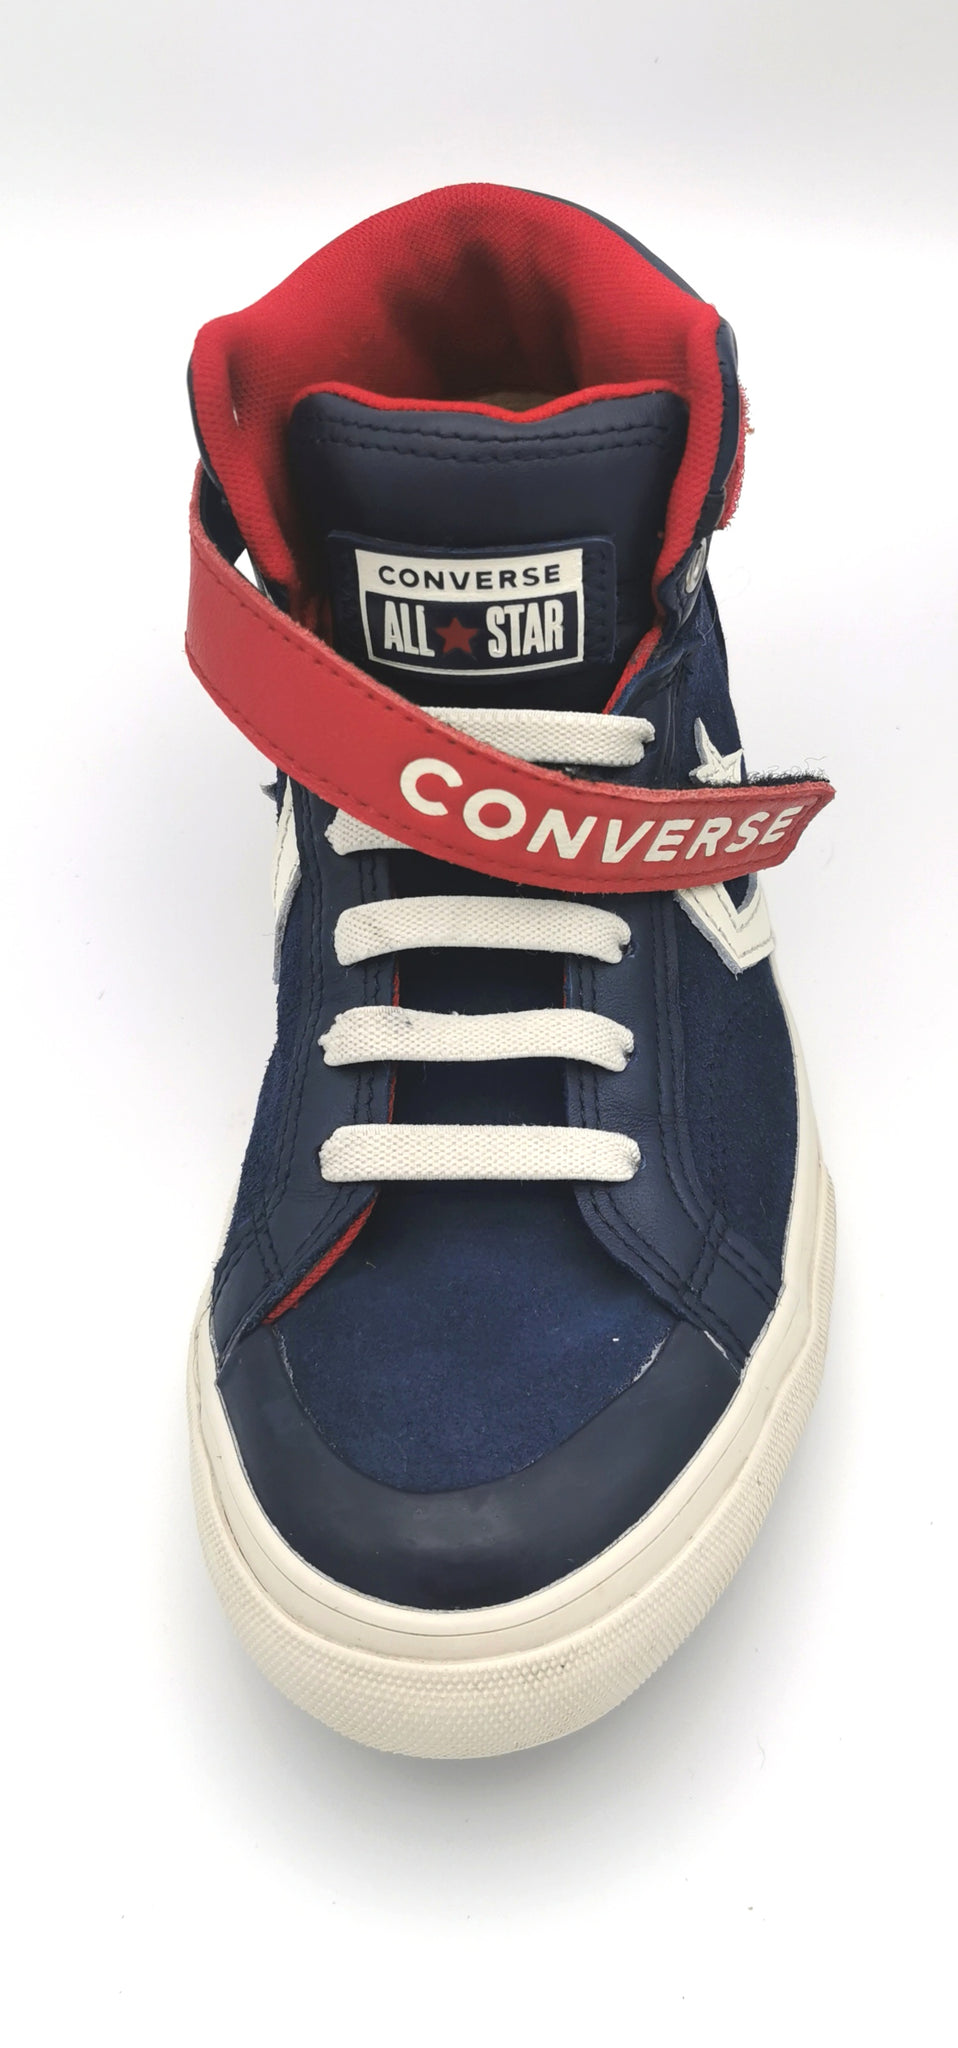 converse high tops youth size 5